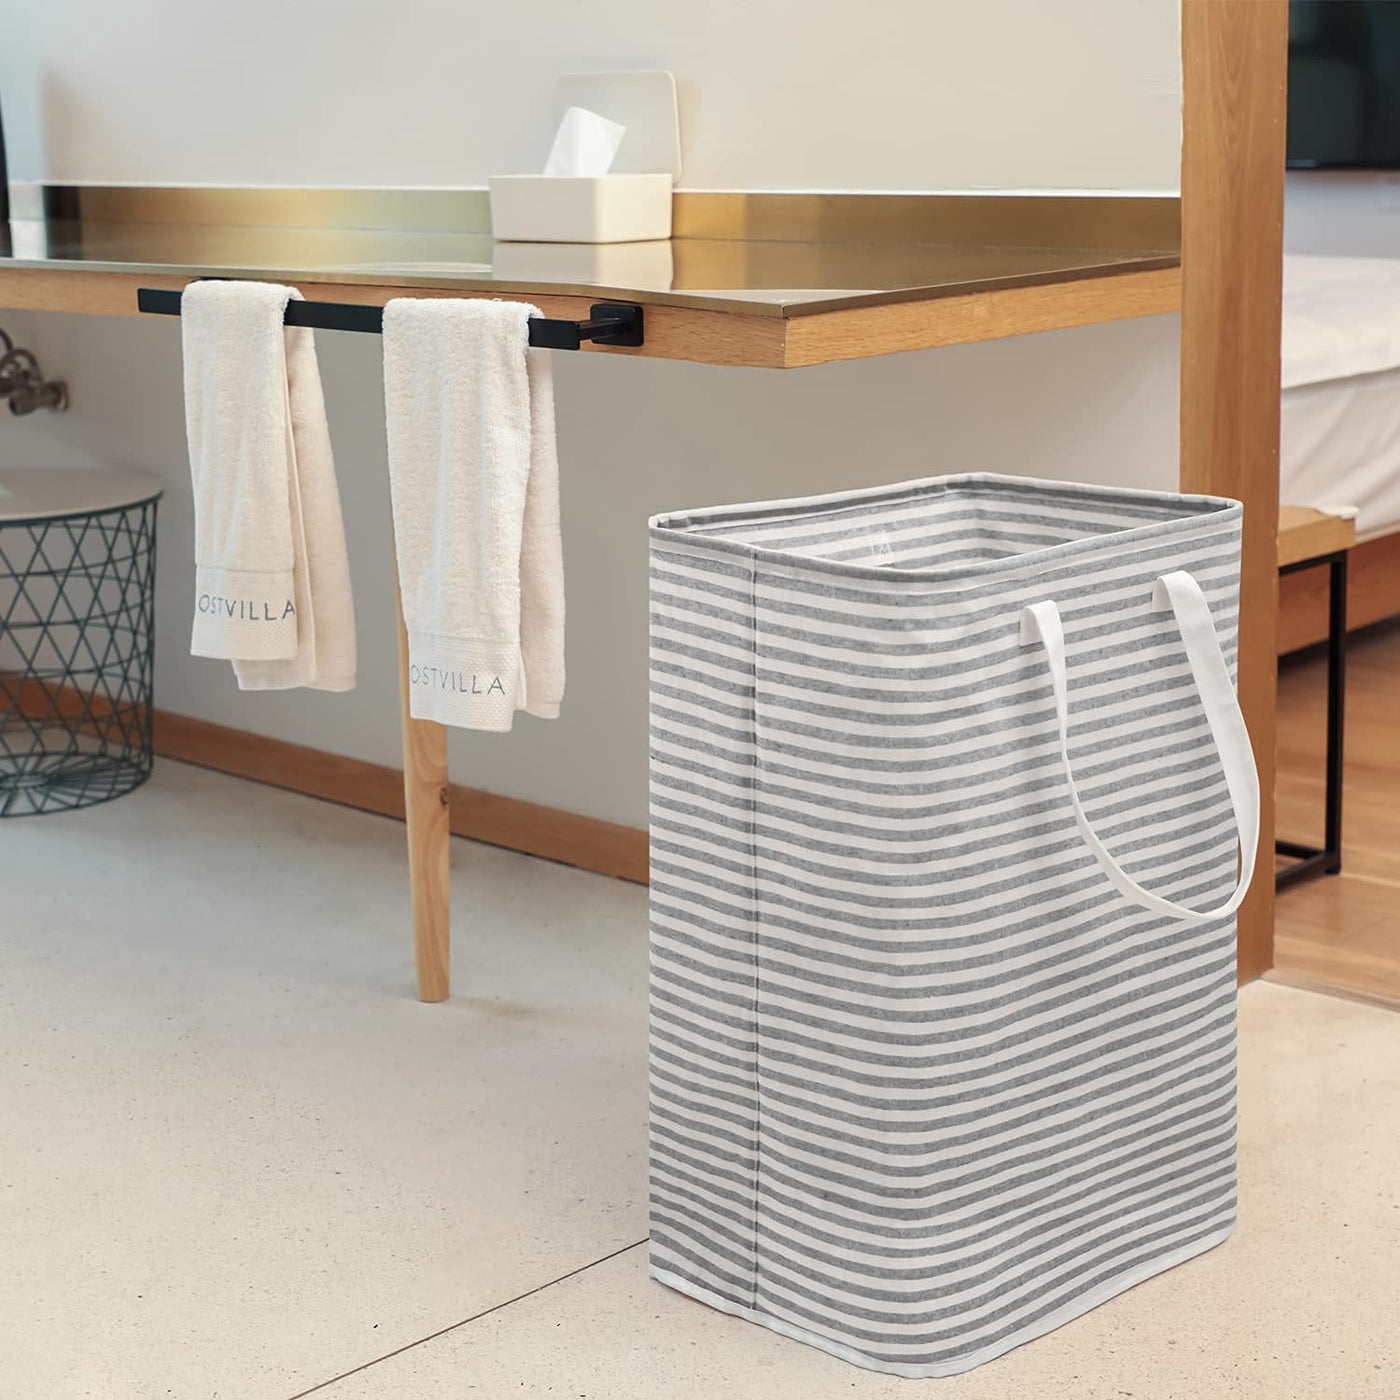 Waterproof Laundry Hamper Collapsible Baskets with Easy Carry Handles - White Grey Stripe